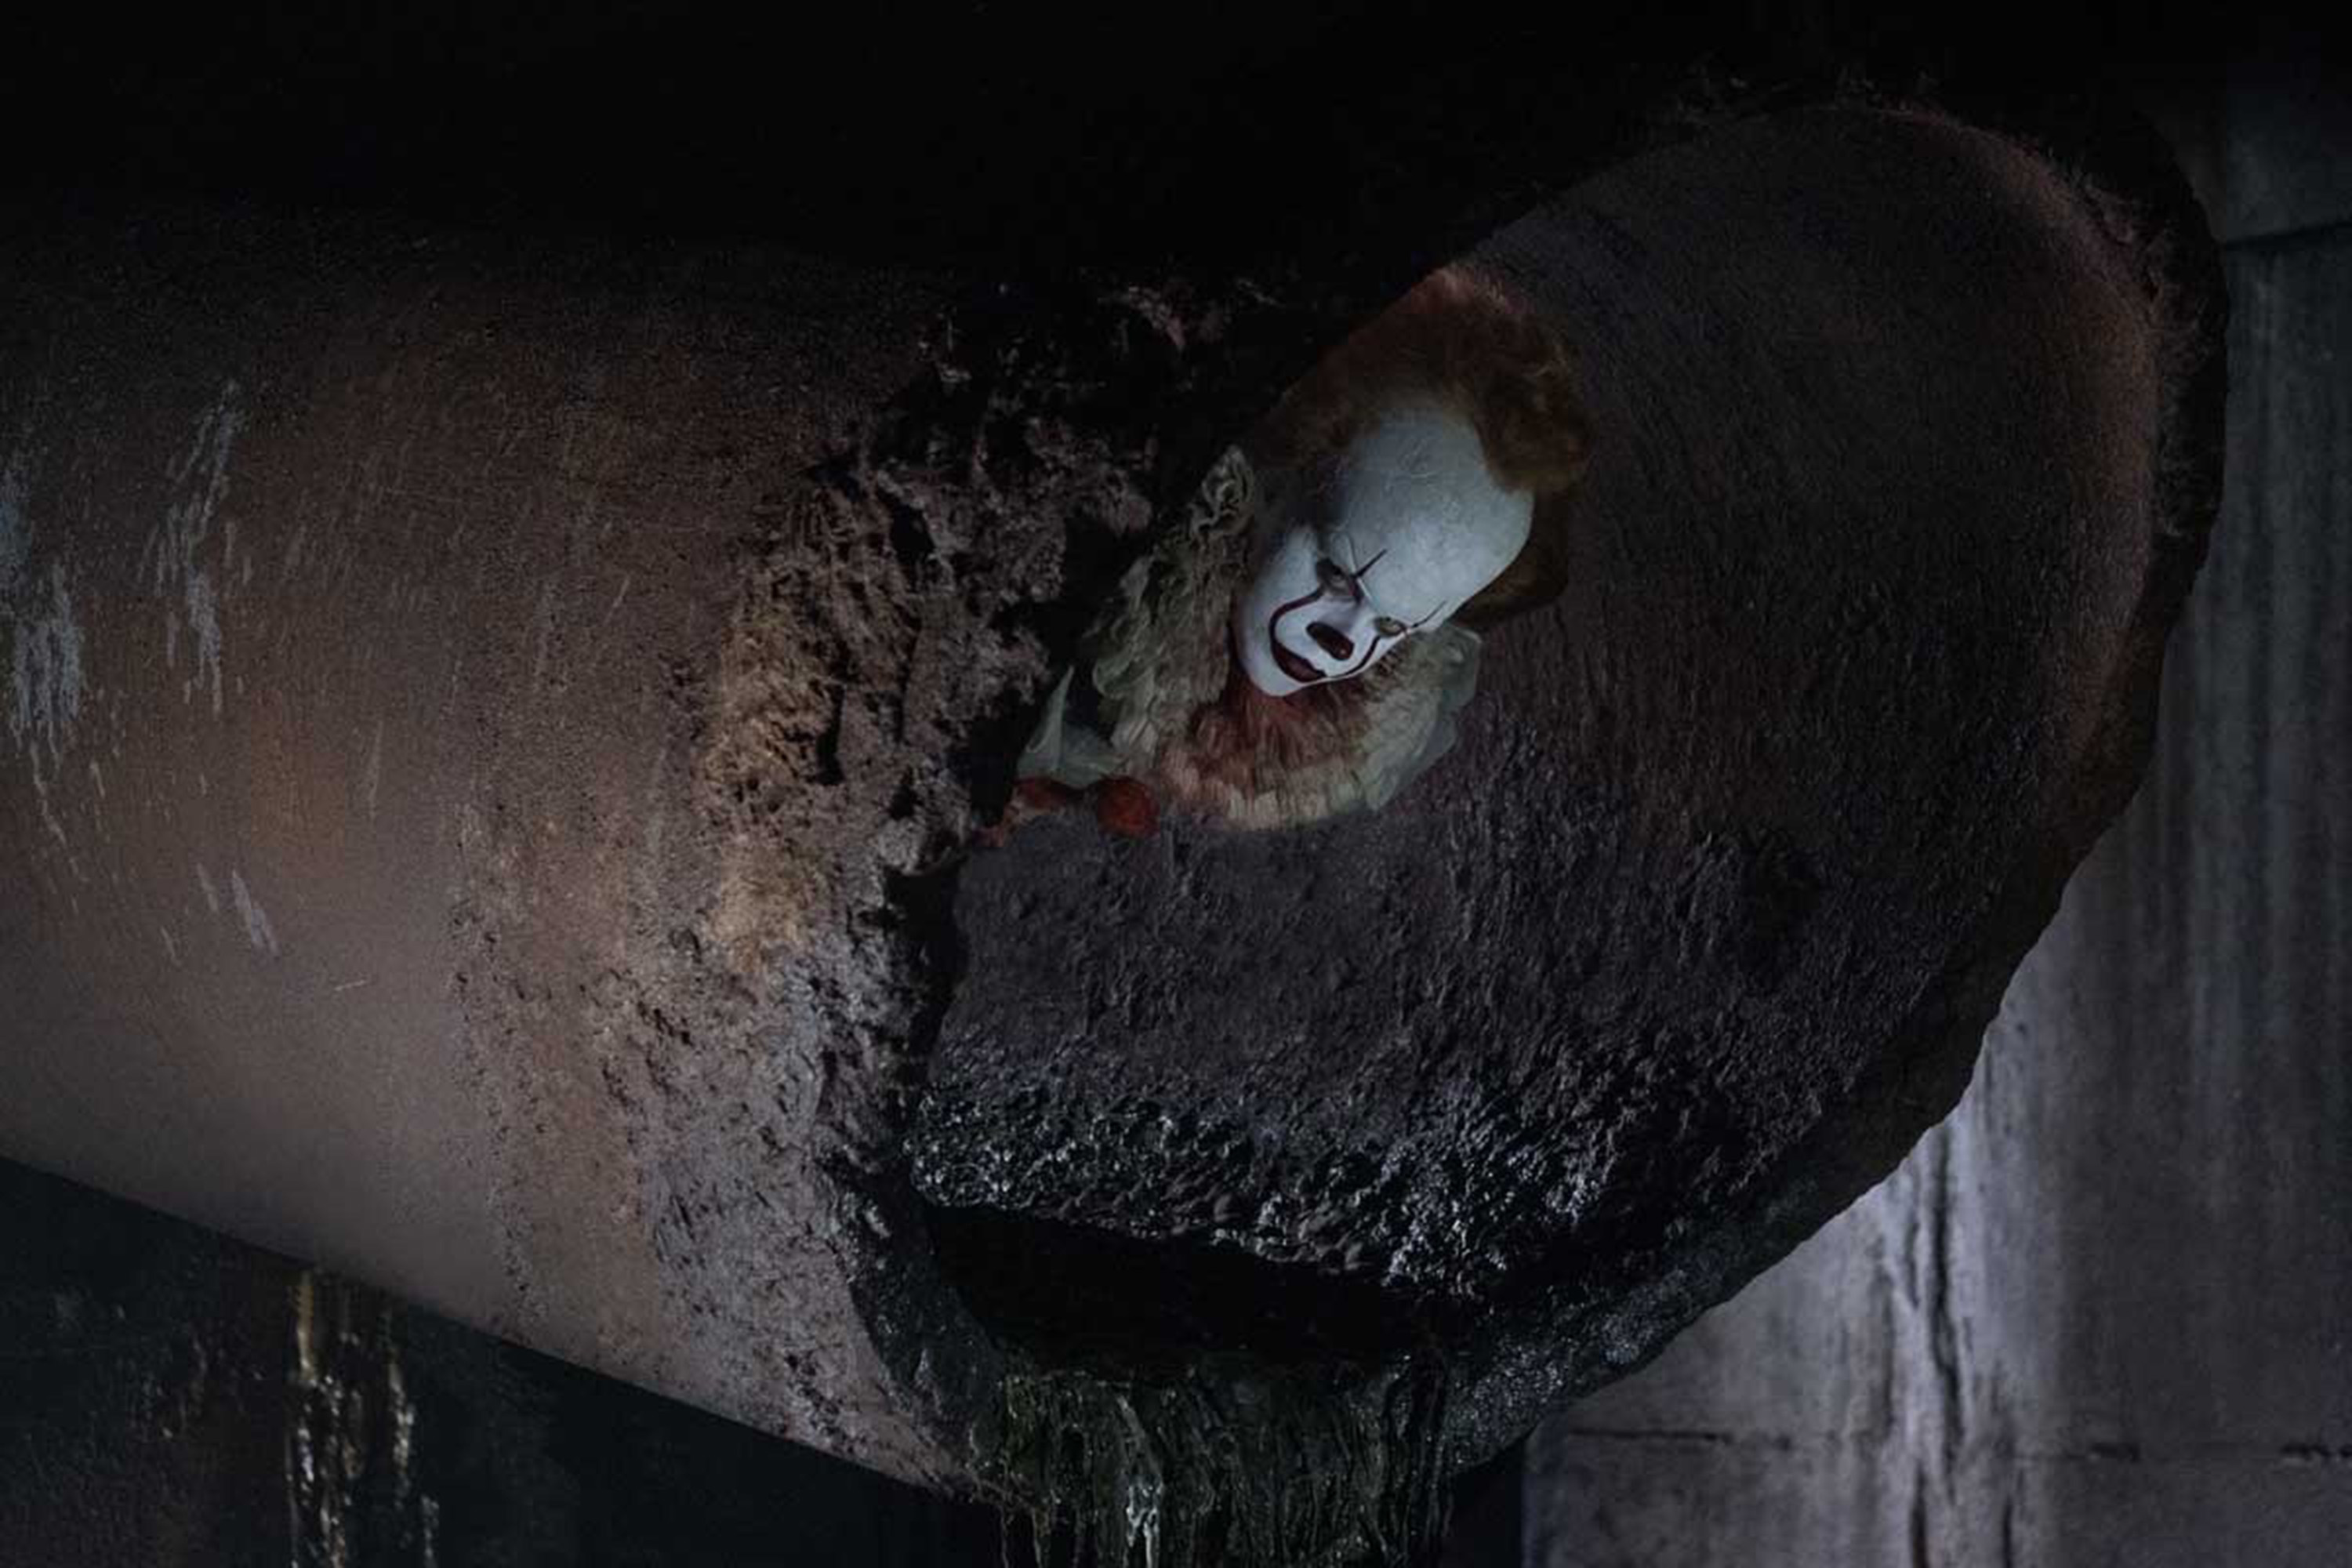 Movie review: 'It'